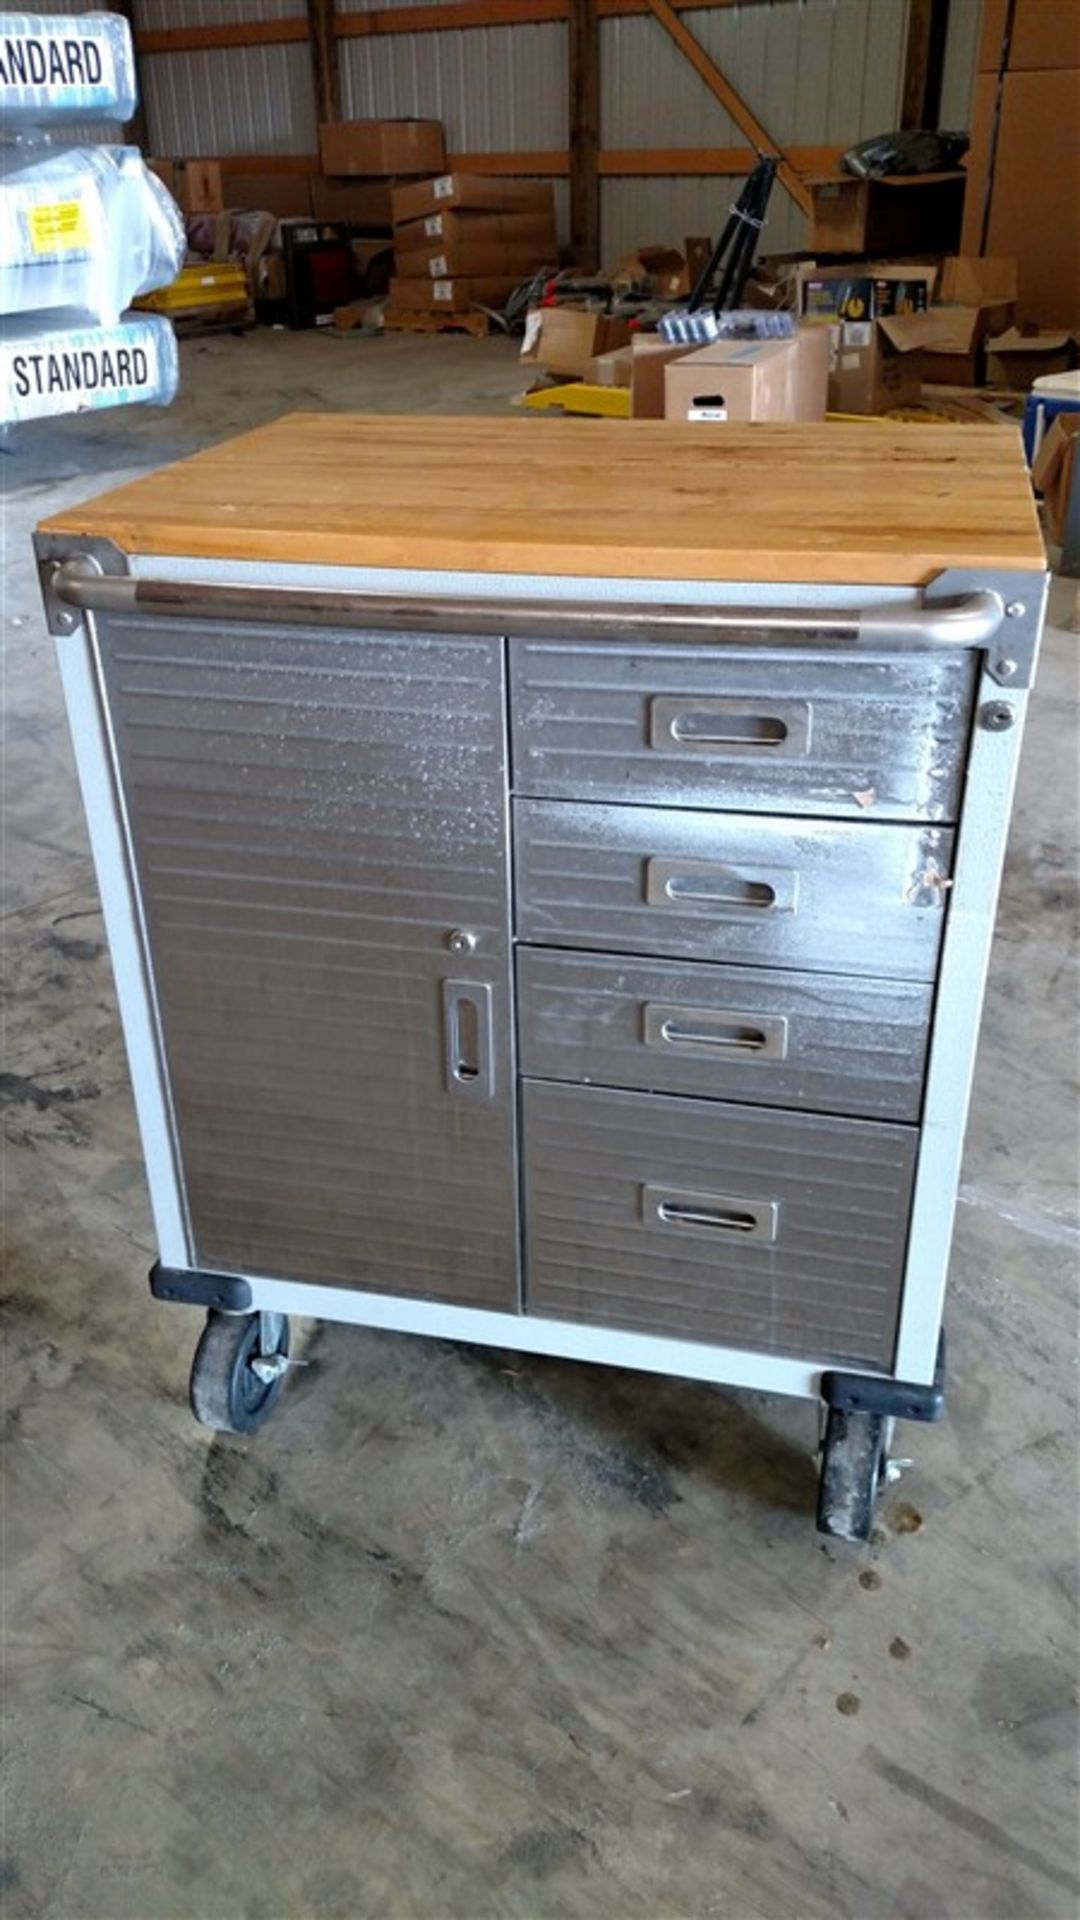 Stainless Steel / Wood Top "Coffee" Cabinet (1 x Your Bid)